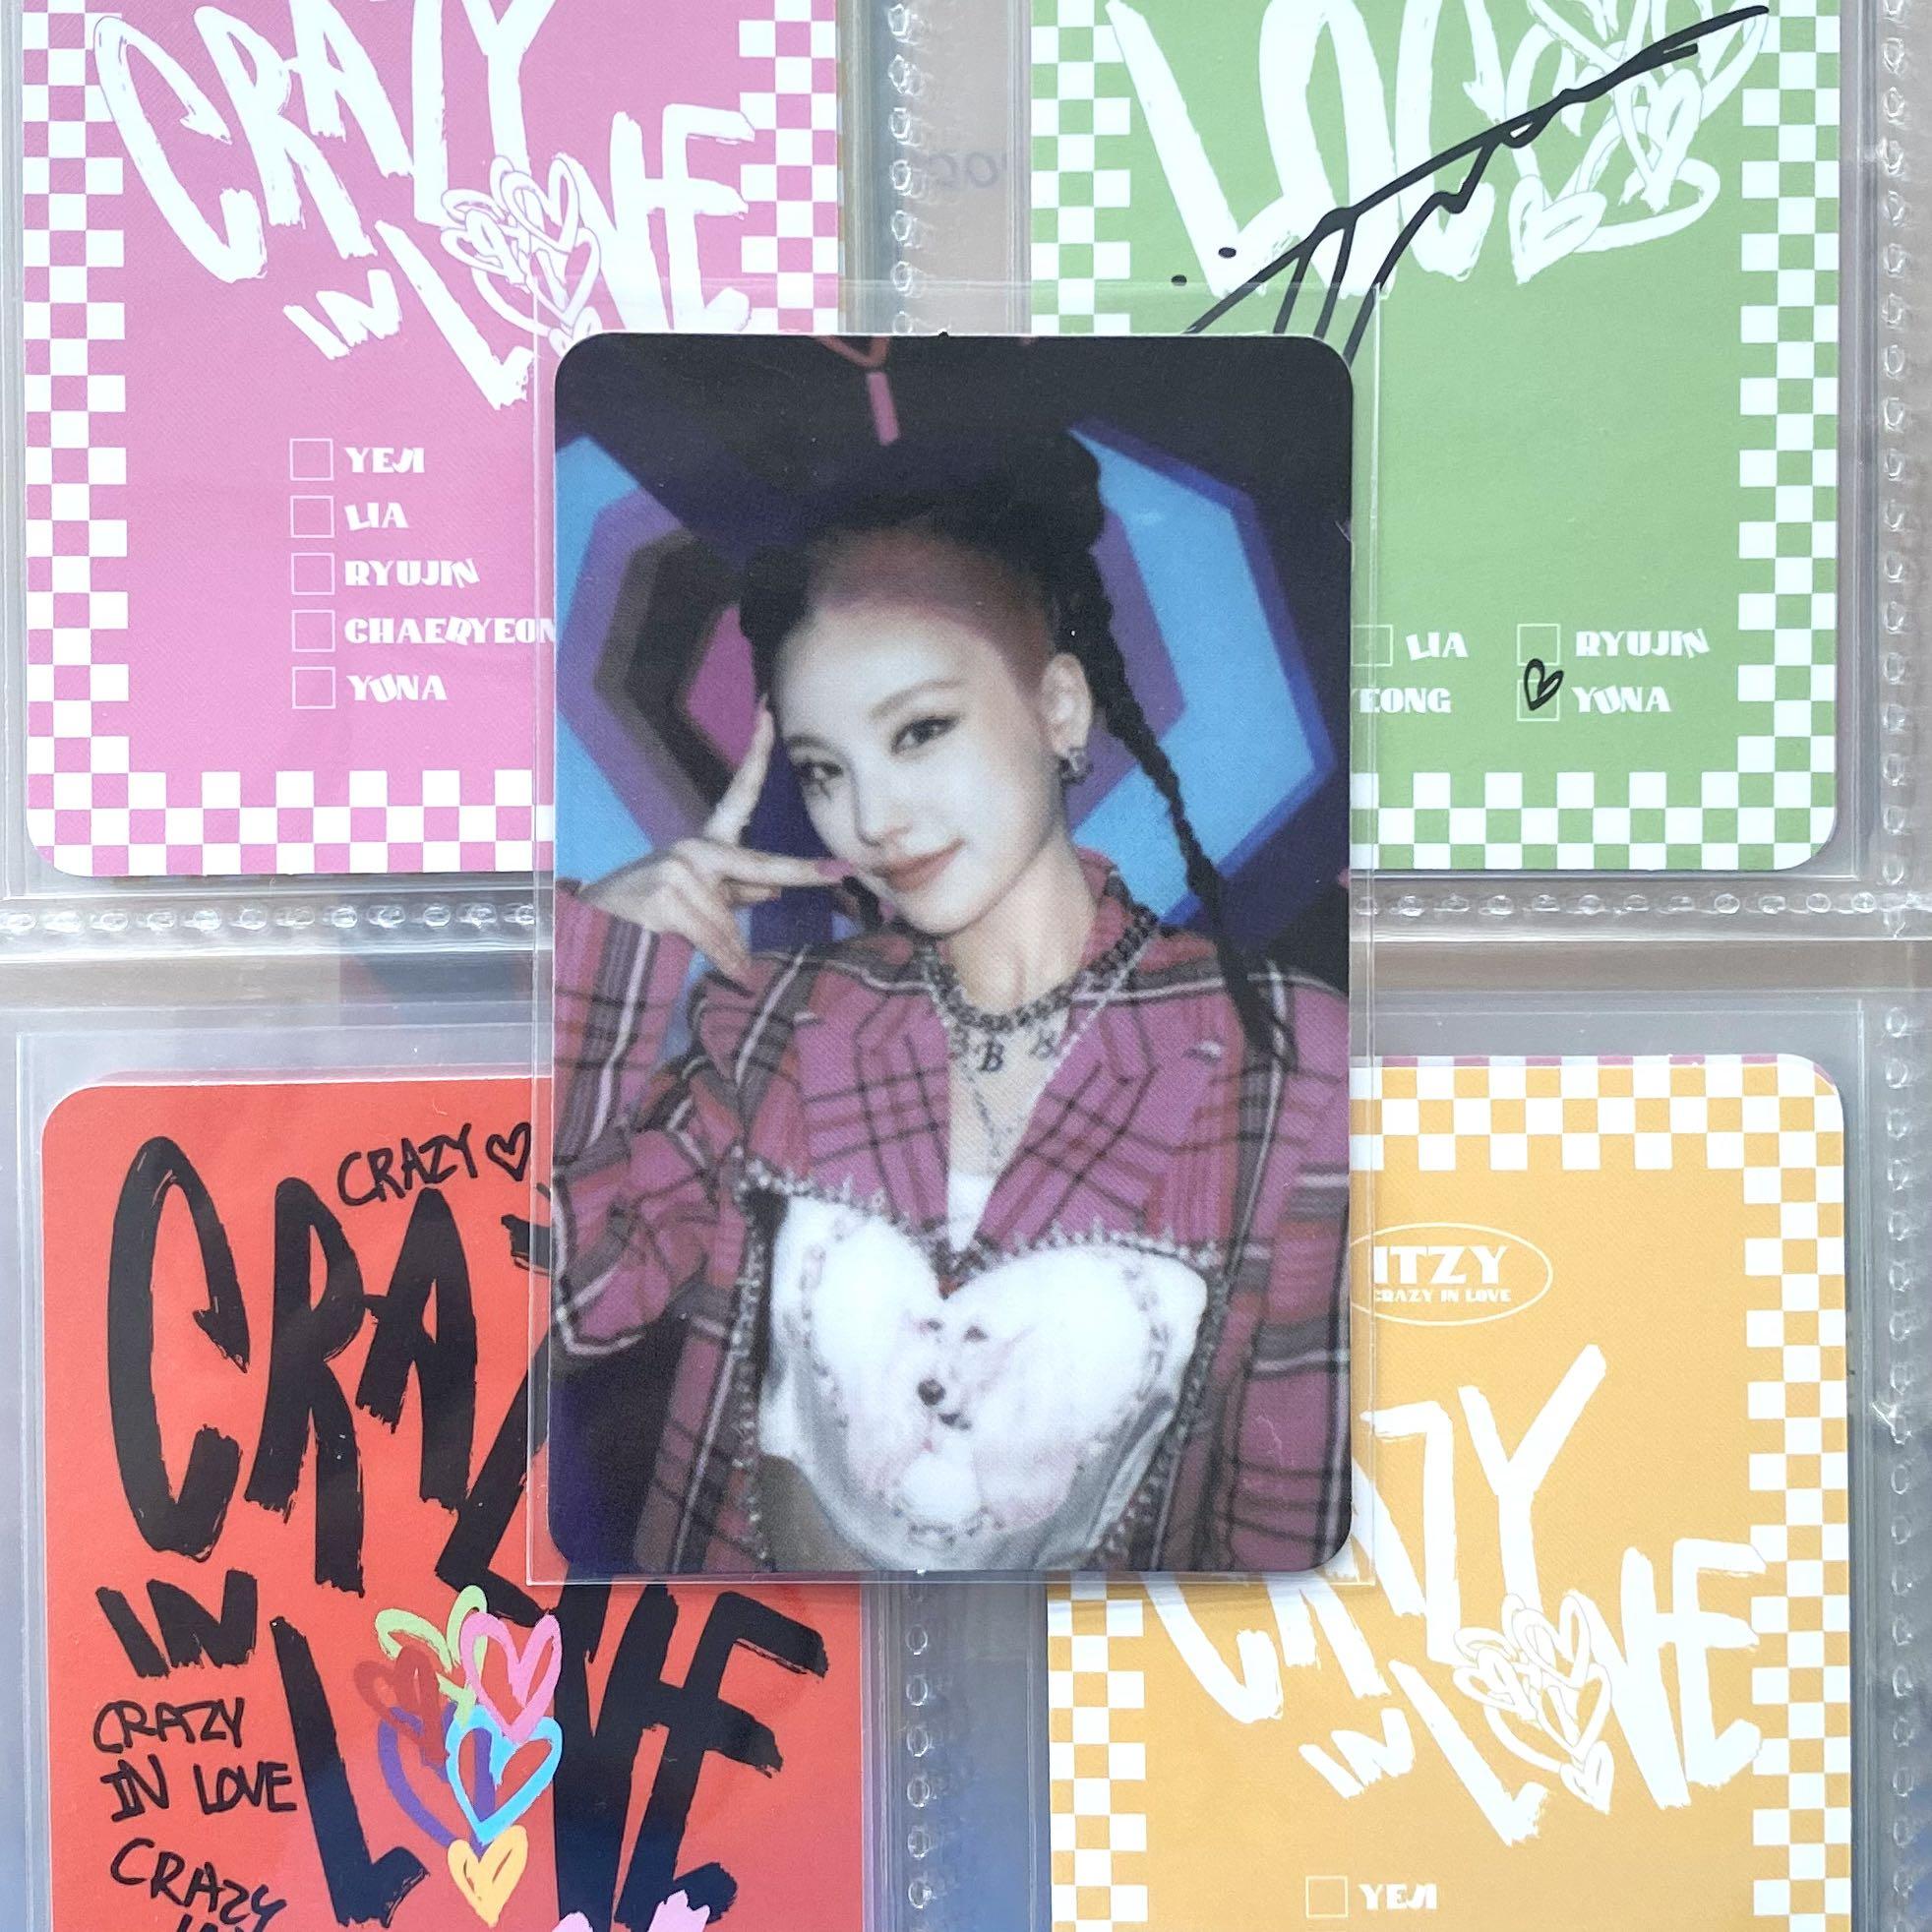 Wtt Itzy Crazy In Love Yeji Special Edition Jewe Case Album Photocard Hobbies Toys